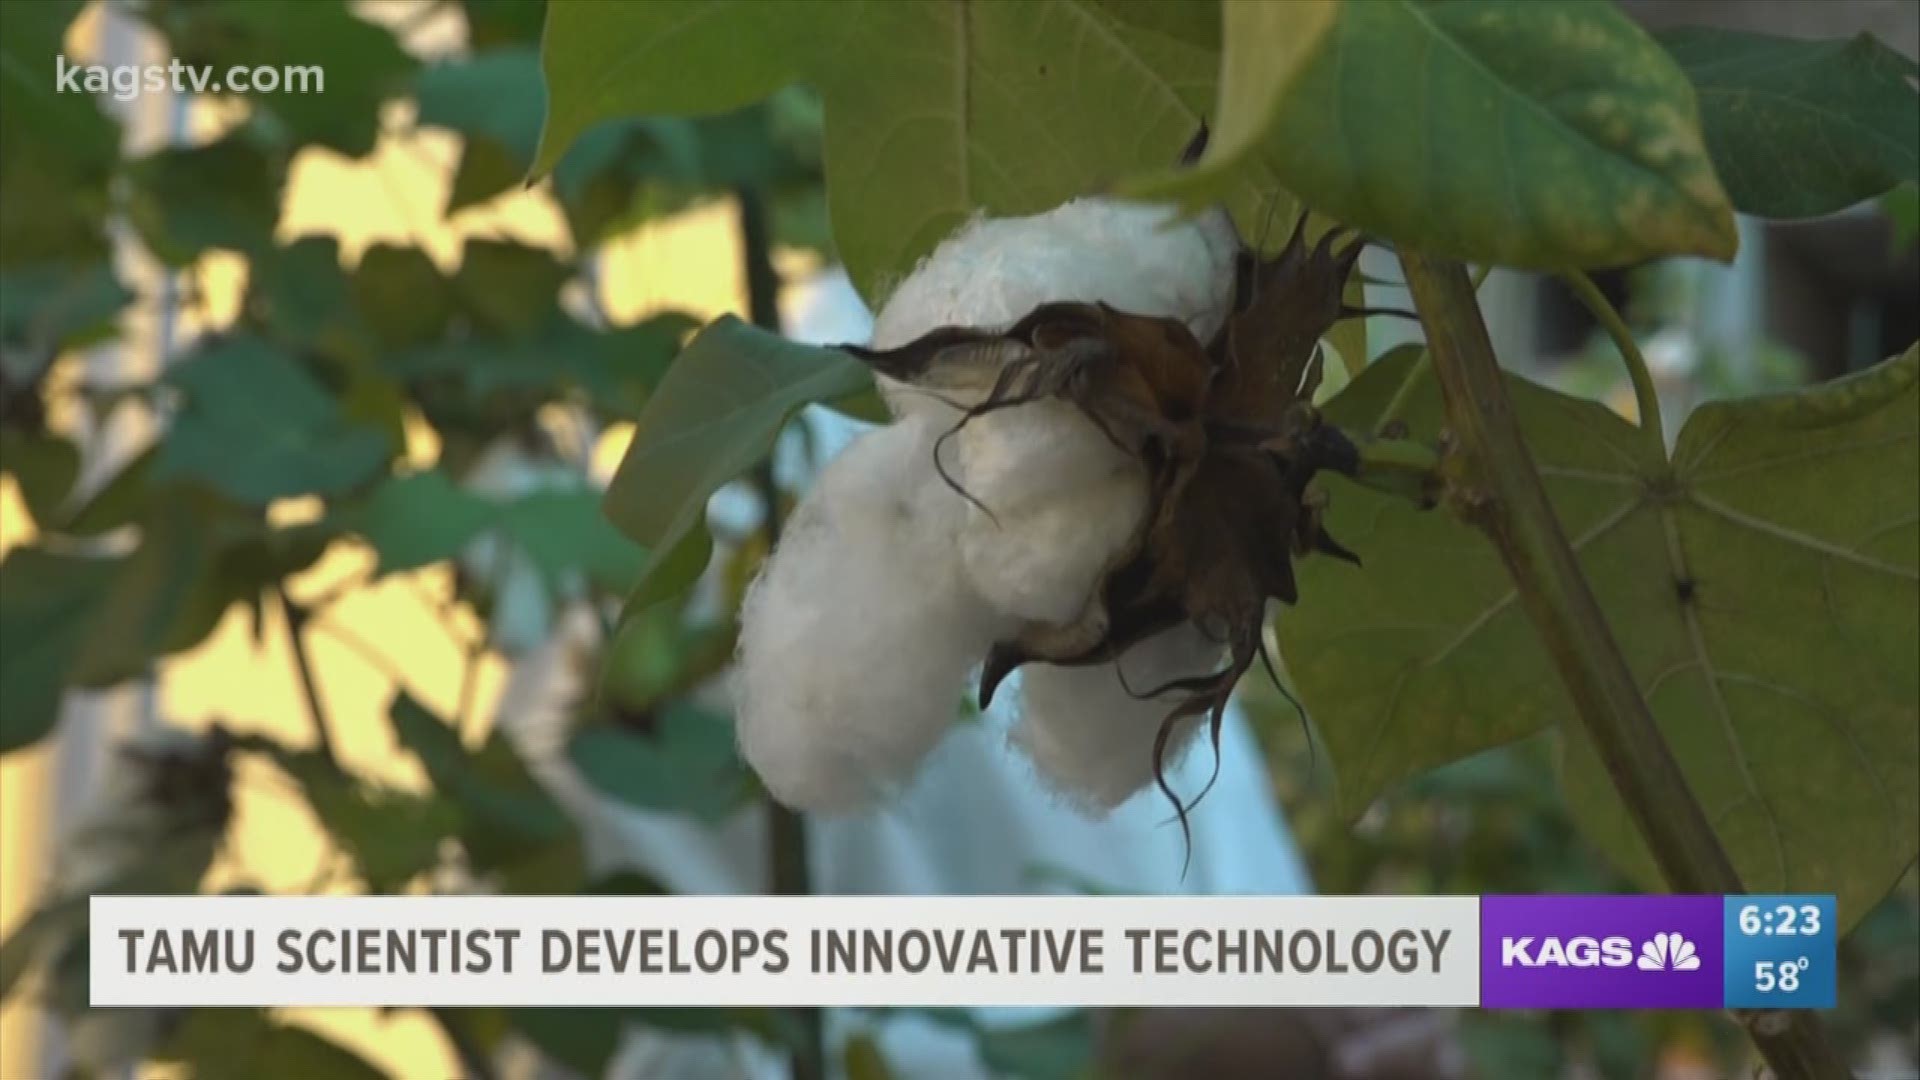 Thanks to decades of research at Texas A&M, the cotton plant will have a global impact, one that has life-saving potential.